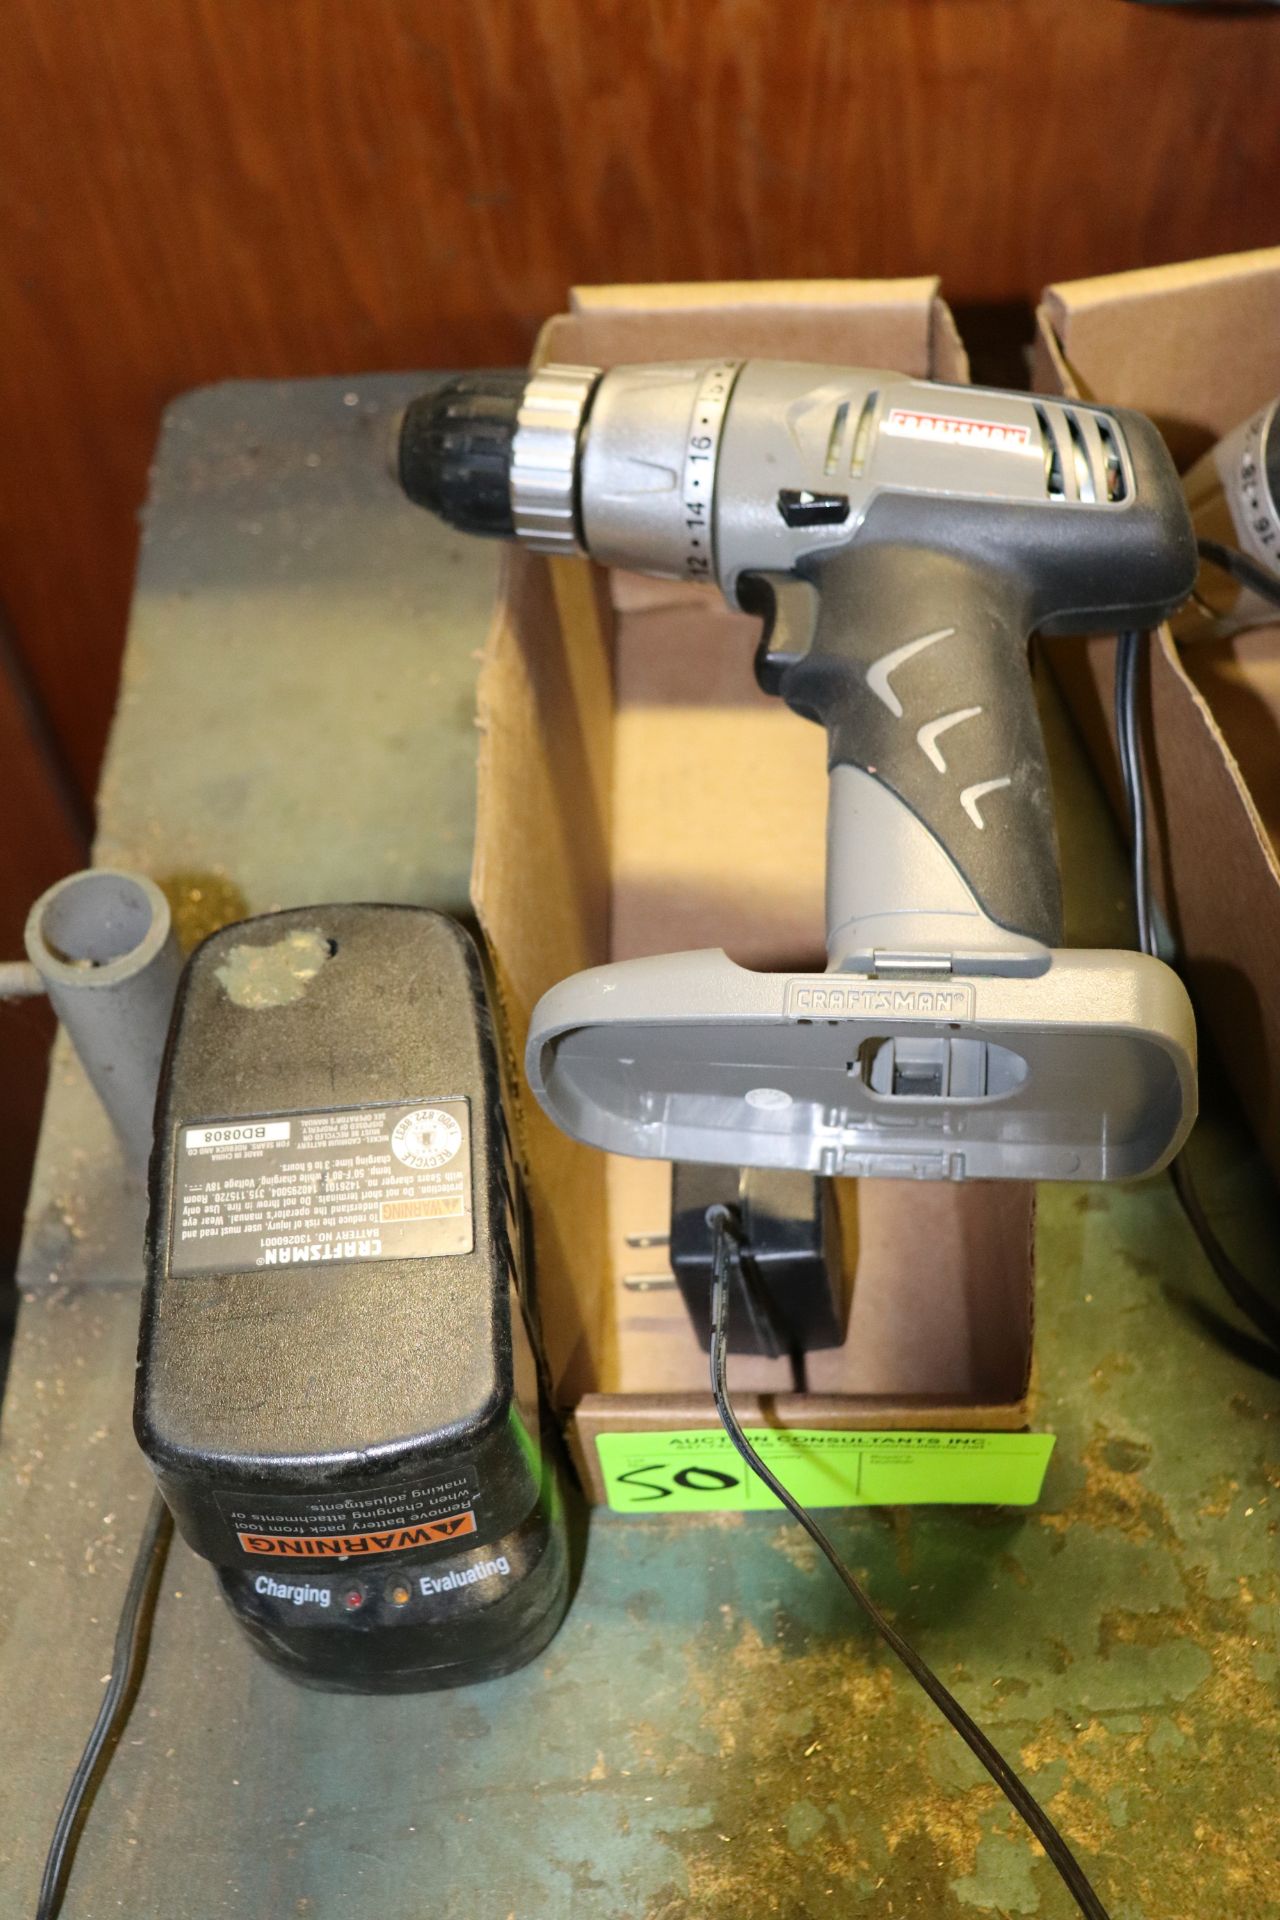 Craftsman drill, battery powered, with battery and charger